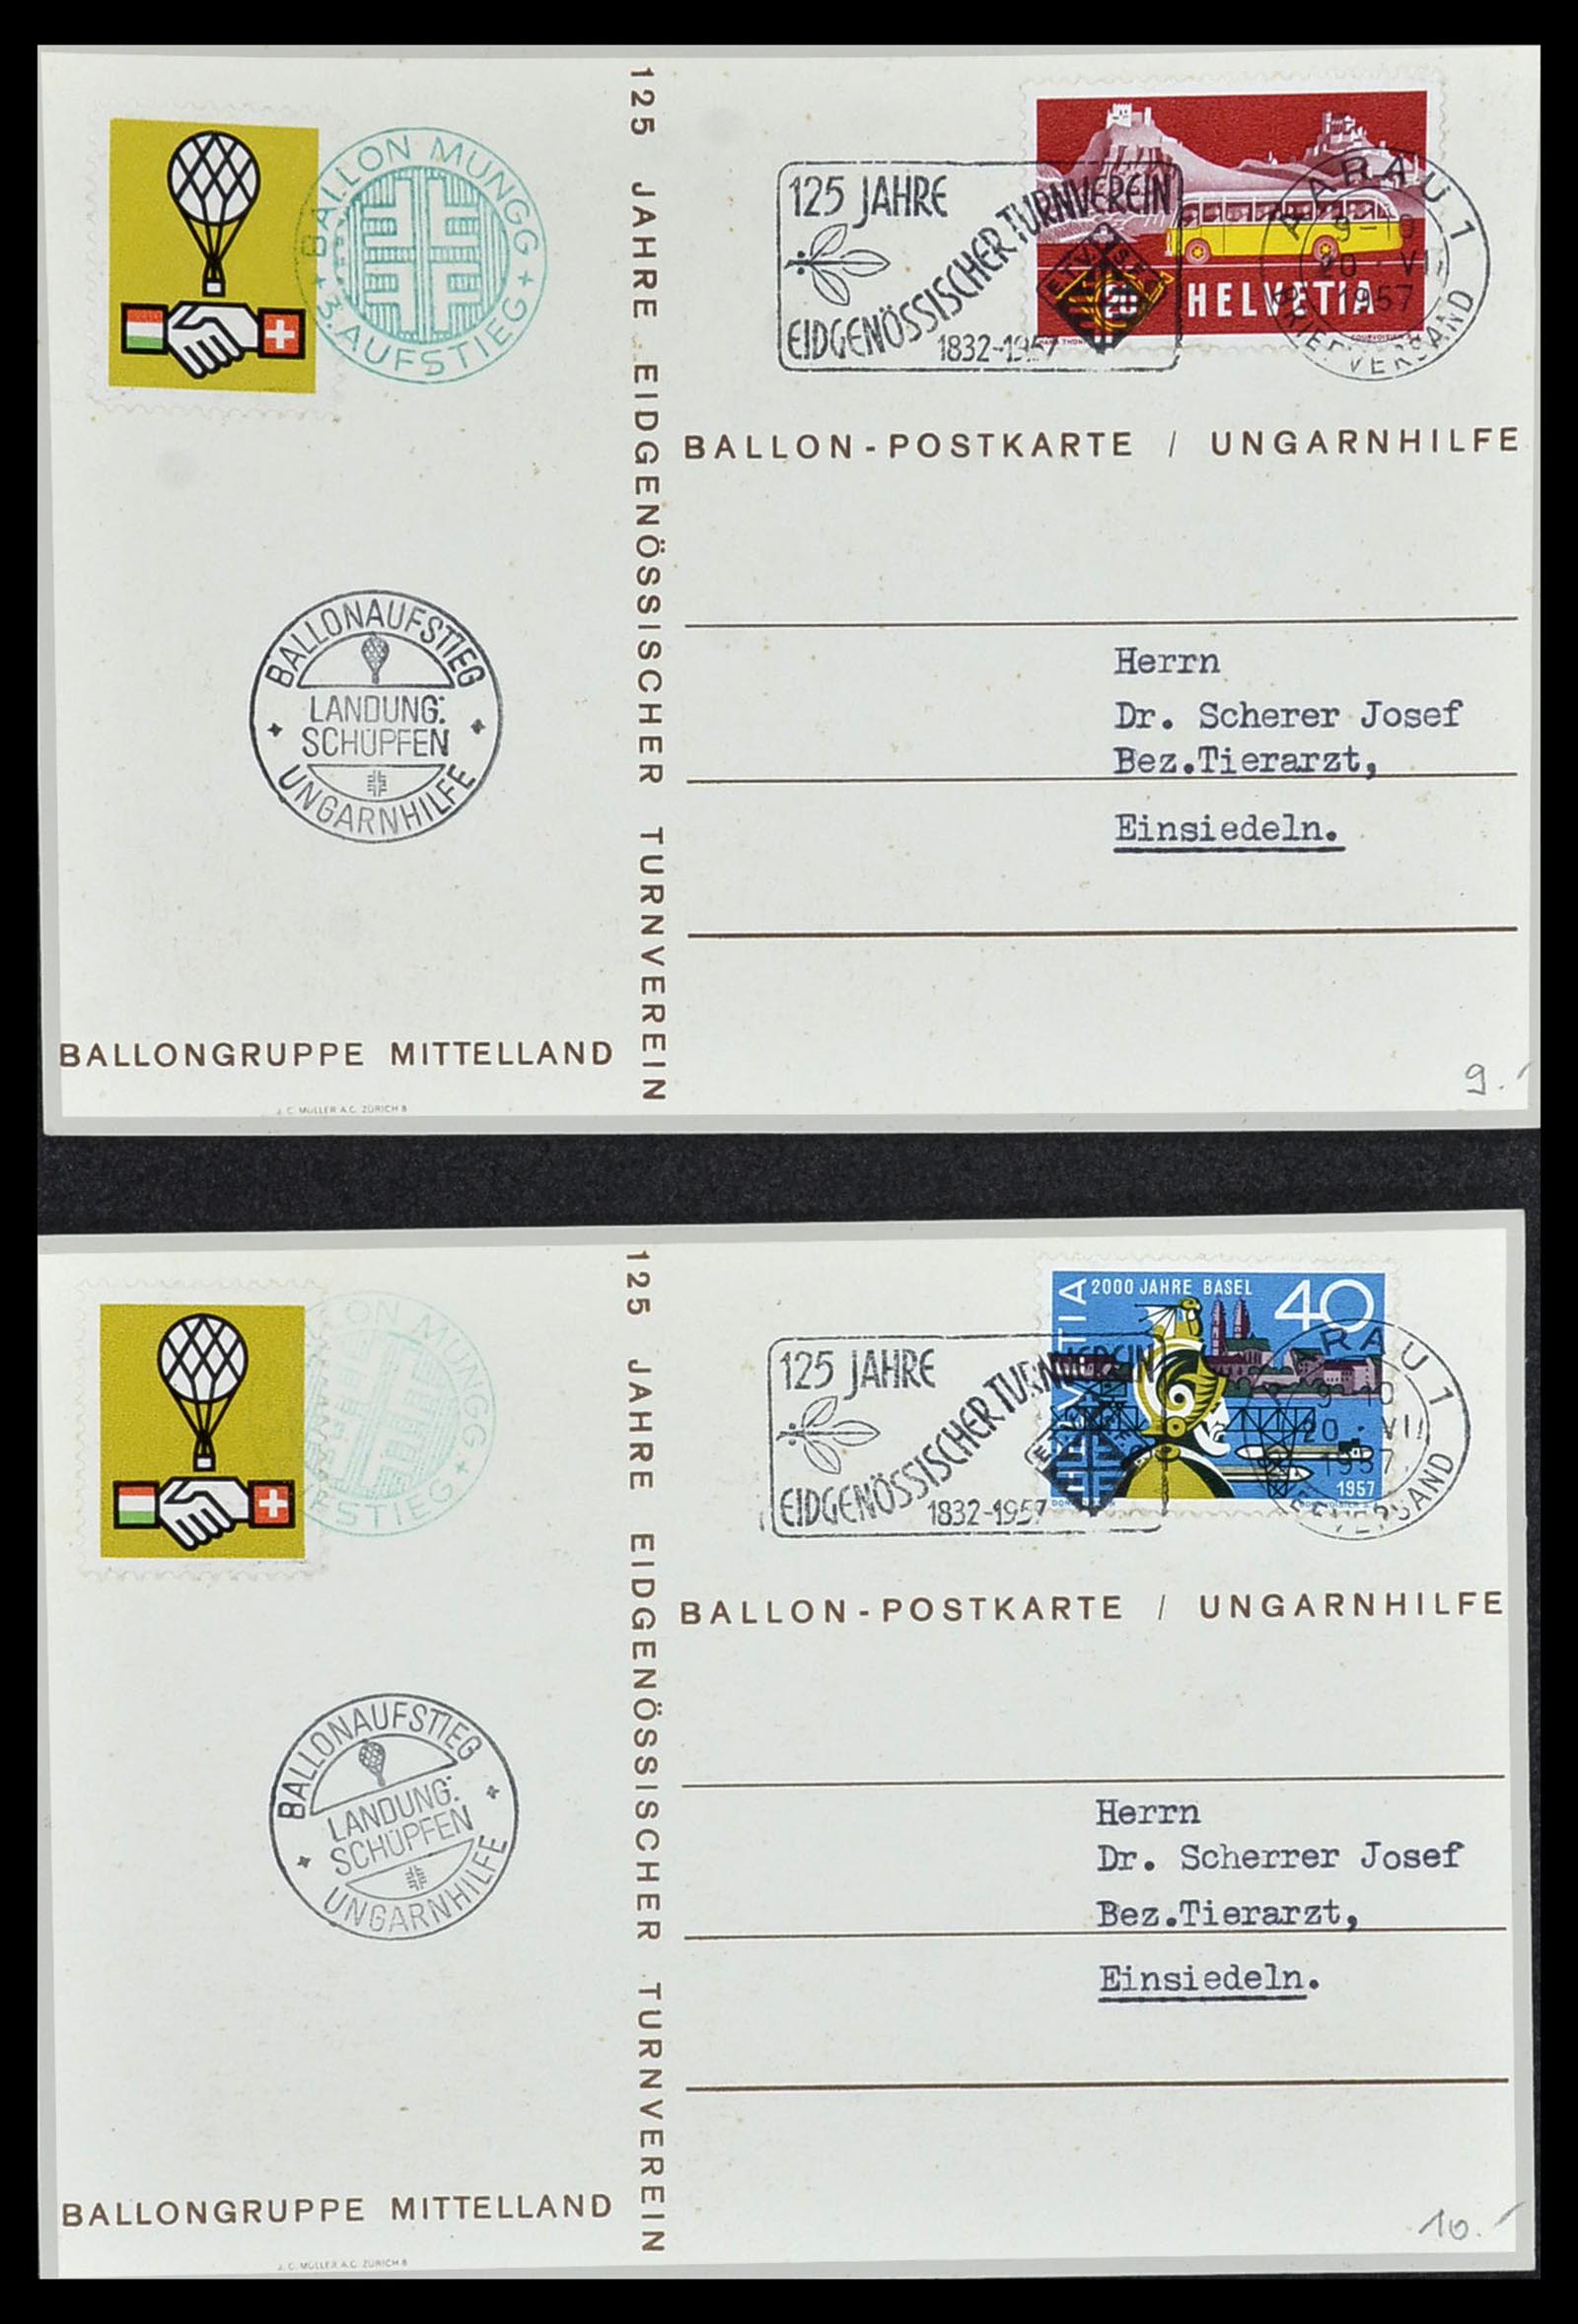 34141 062 - Stamp collection 34141 Switzerland airmail covers 1920-1960.